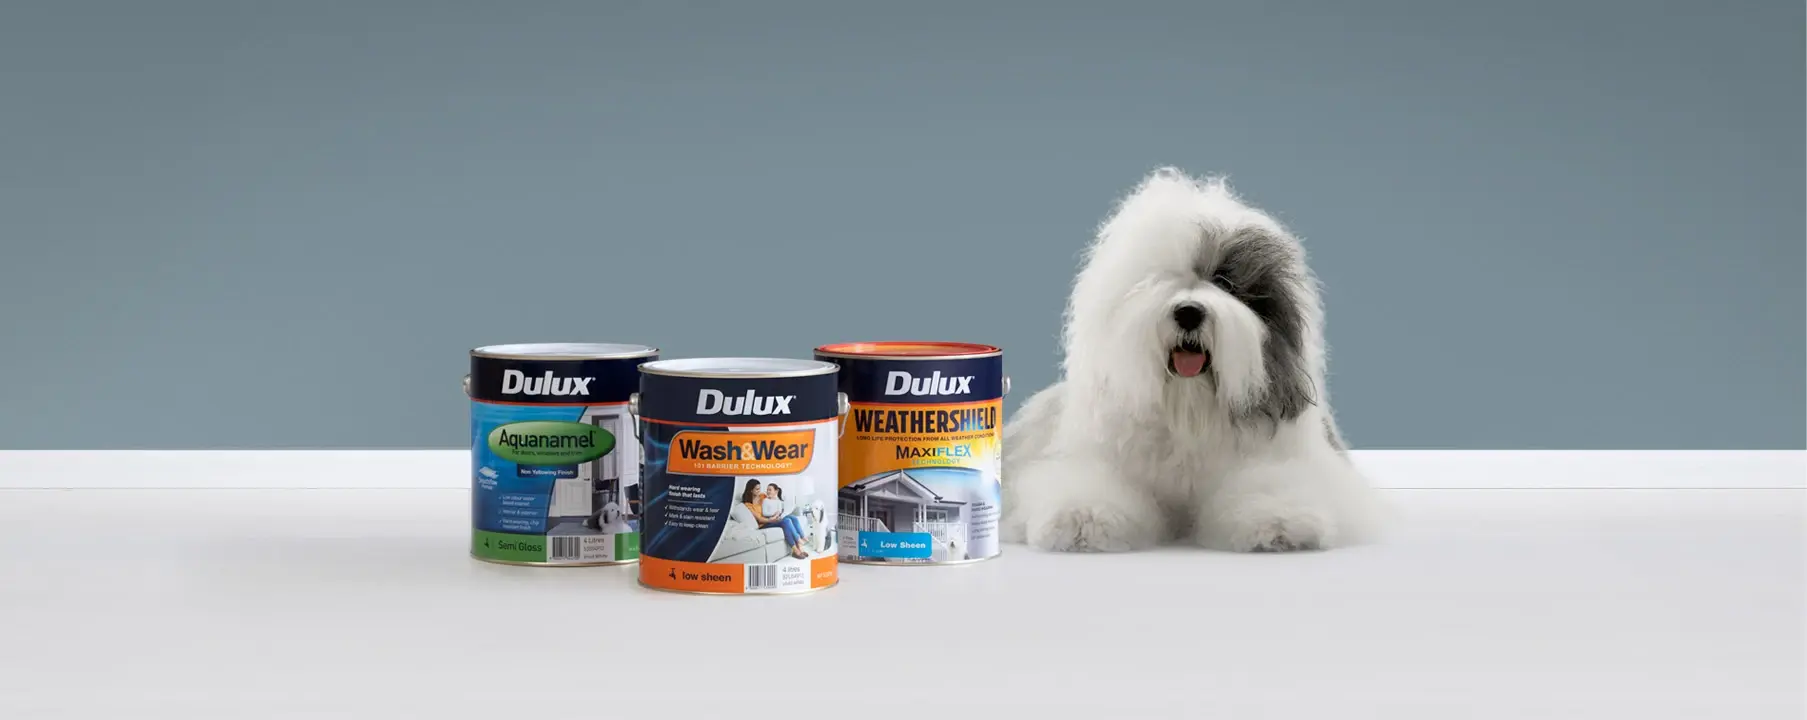 Dulux dog with Wash&Wear, Weathershield and Aquanamel paint tins.